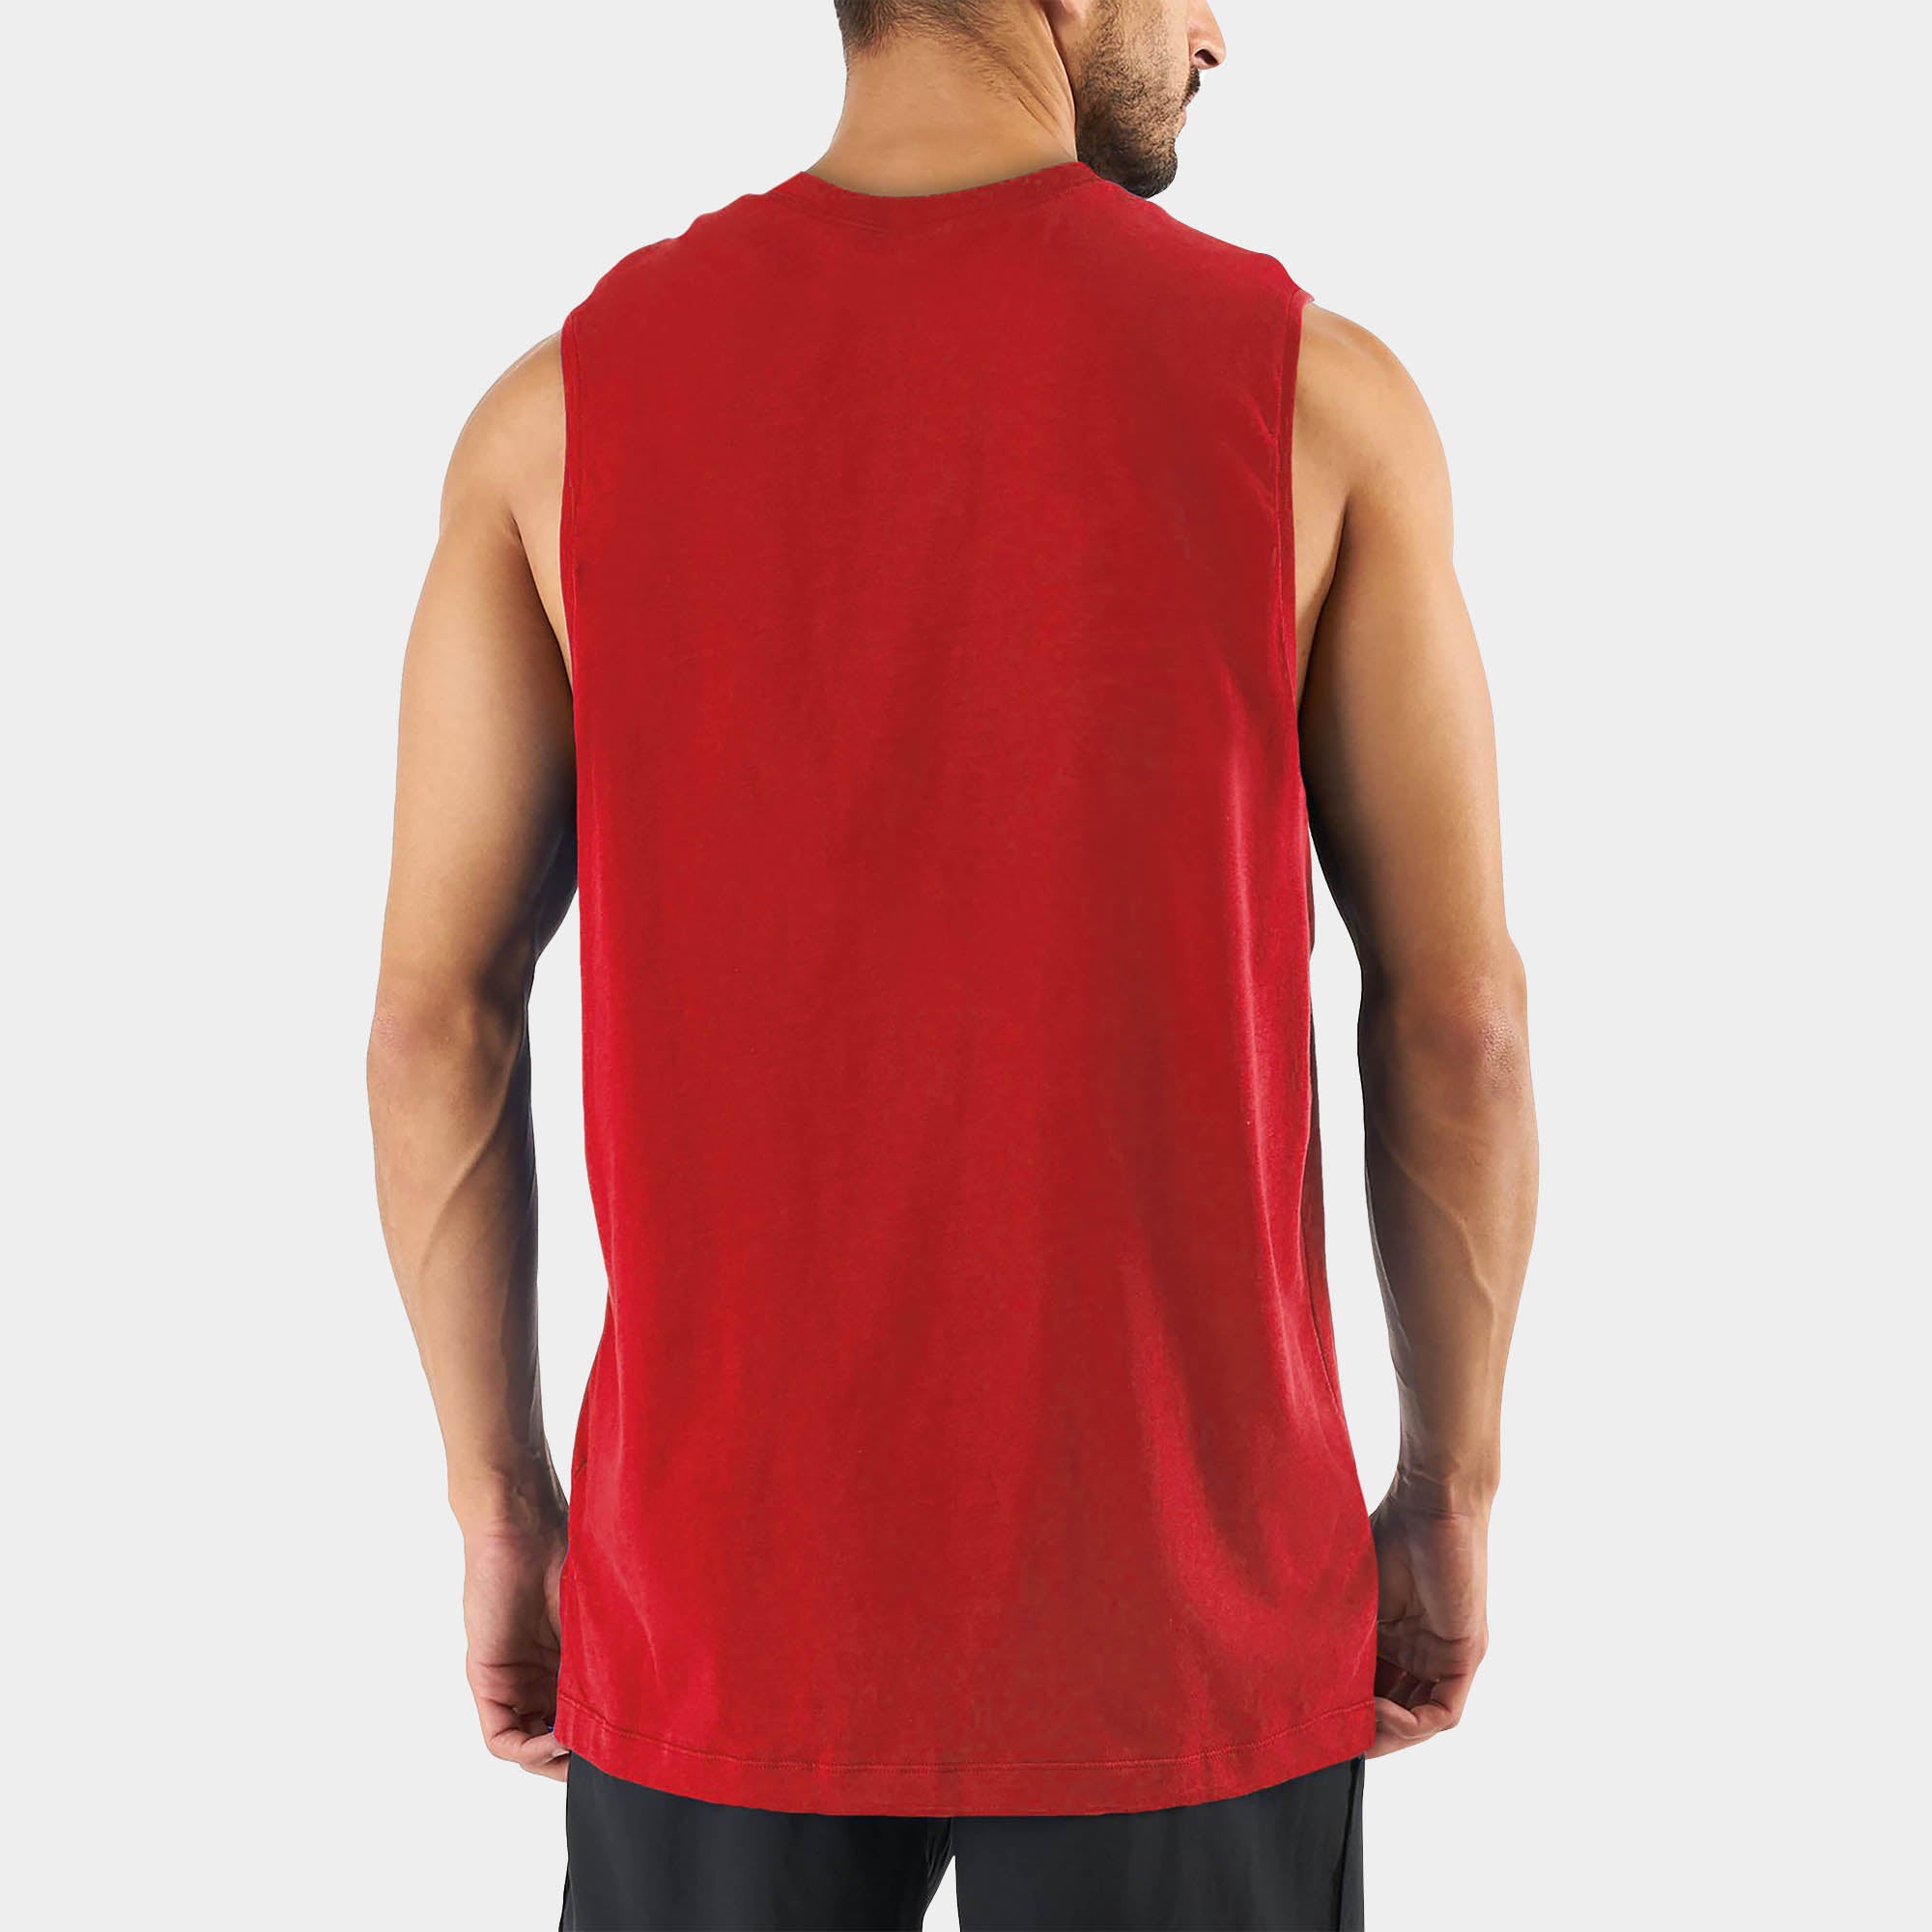 muscle tank_muscle tee_muscle tank tops_cropped muscle tank_under armour muscle shirt_insta slim tank_men muscle shirt_tank top_Red